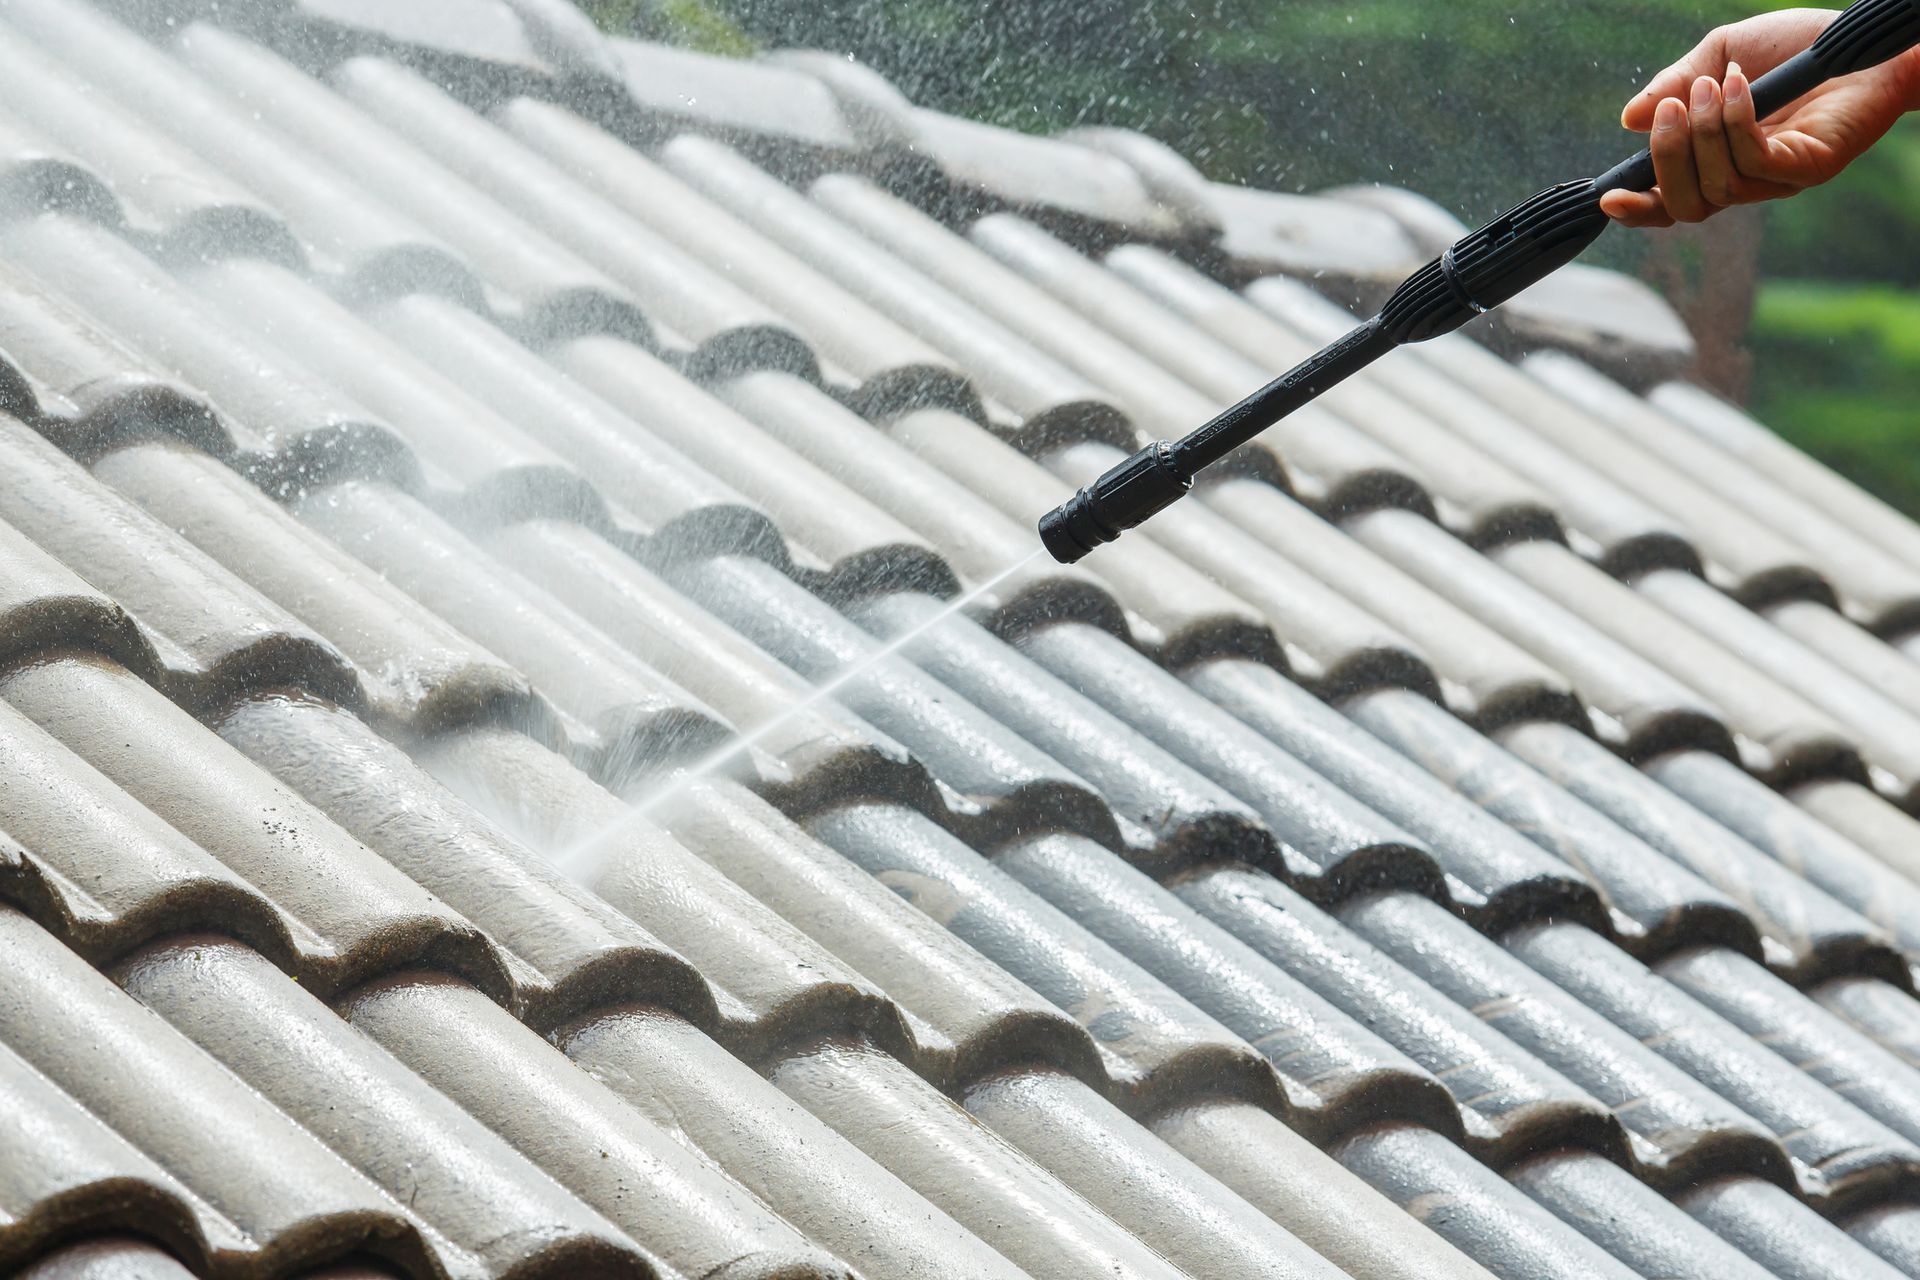 A person is cleaning a tiled roof with a high pressure washer.